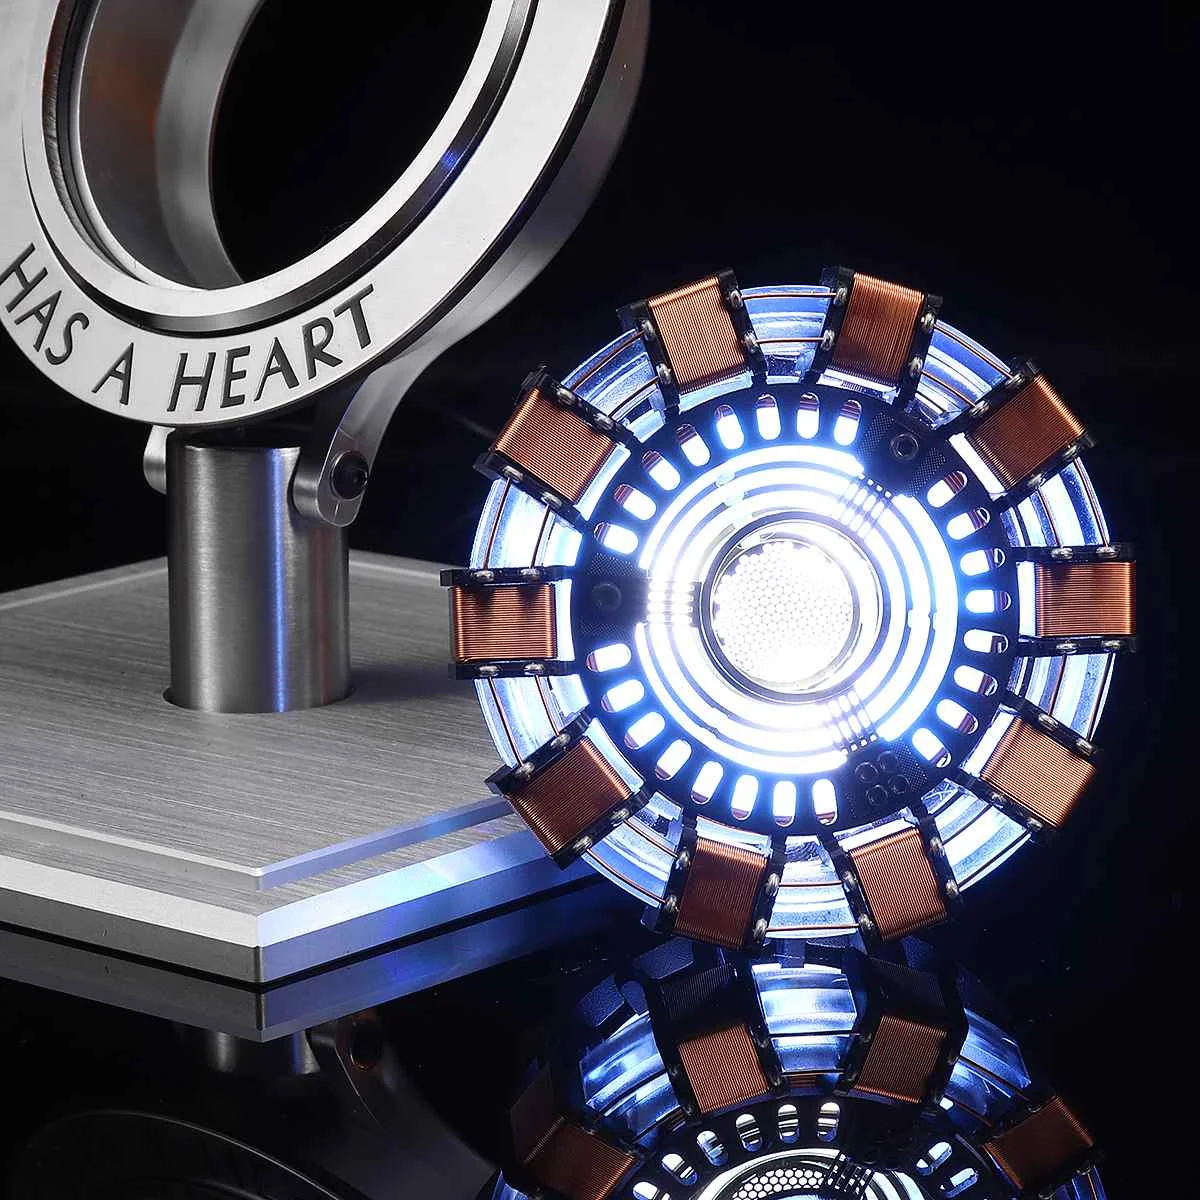 MK2 1:1 Scale Arc Reactor Alloy Model Collection USB LED Light Action Model Building Kits With Remote Control DIY Model Lamp